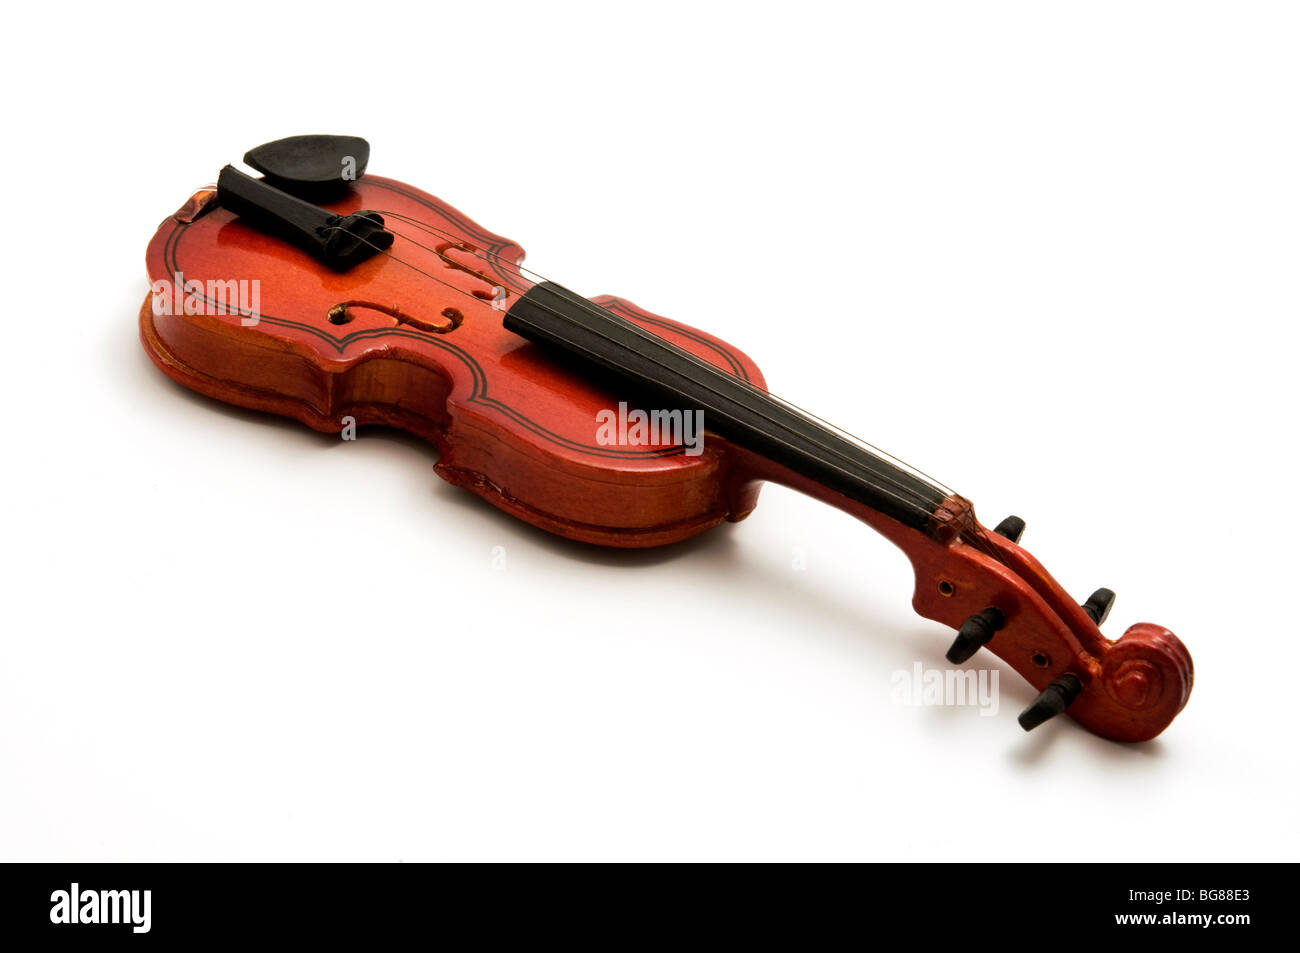 Violin on a white background Stock Photo